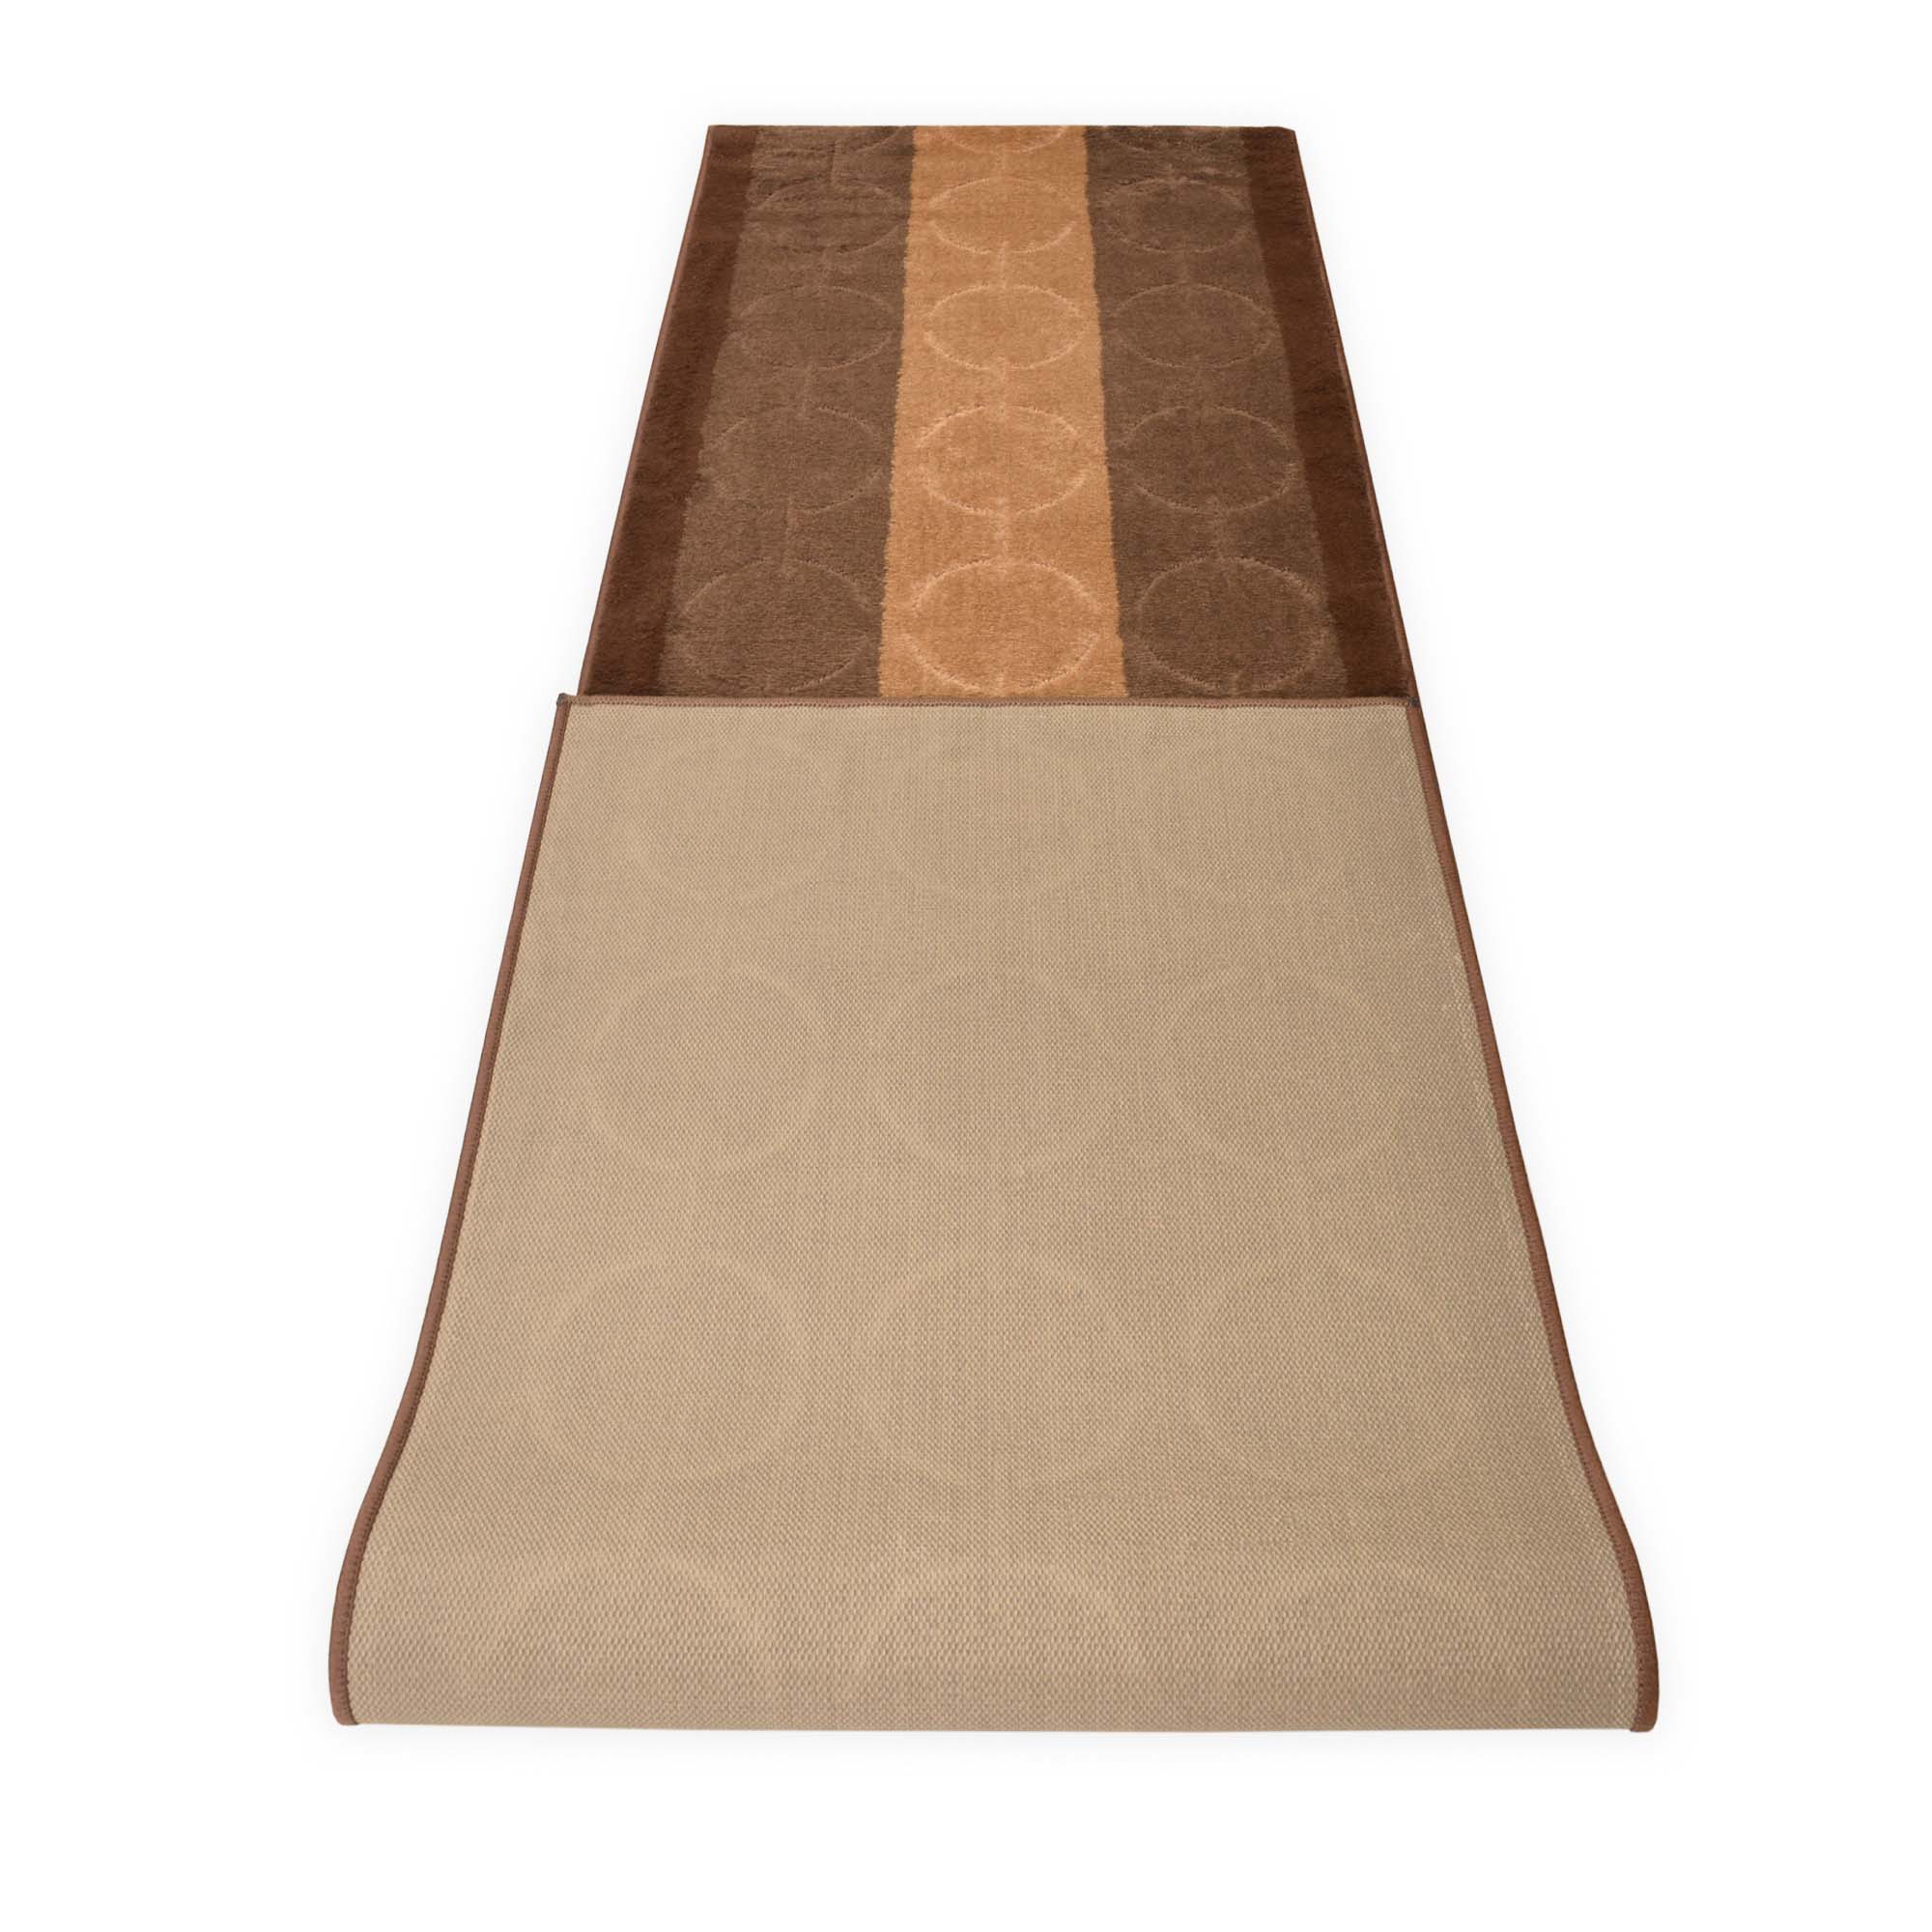 Machine Washable Custom Size Runner Rug Platin Circles Abstract Brown Skid Resistant Runner Rug  Customize Up to 50 Feet and 30 Inch Width Runner Rug